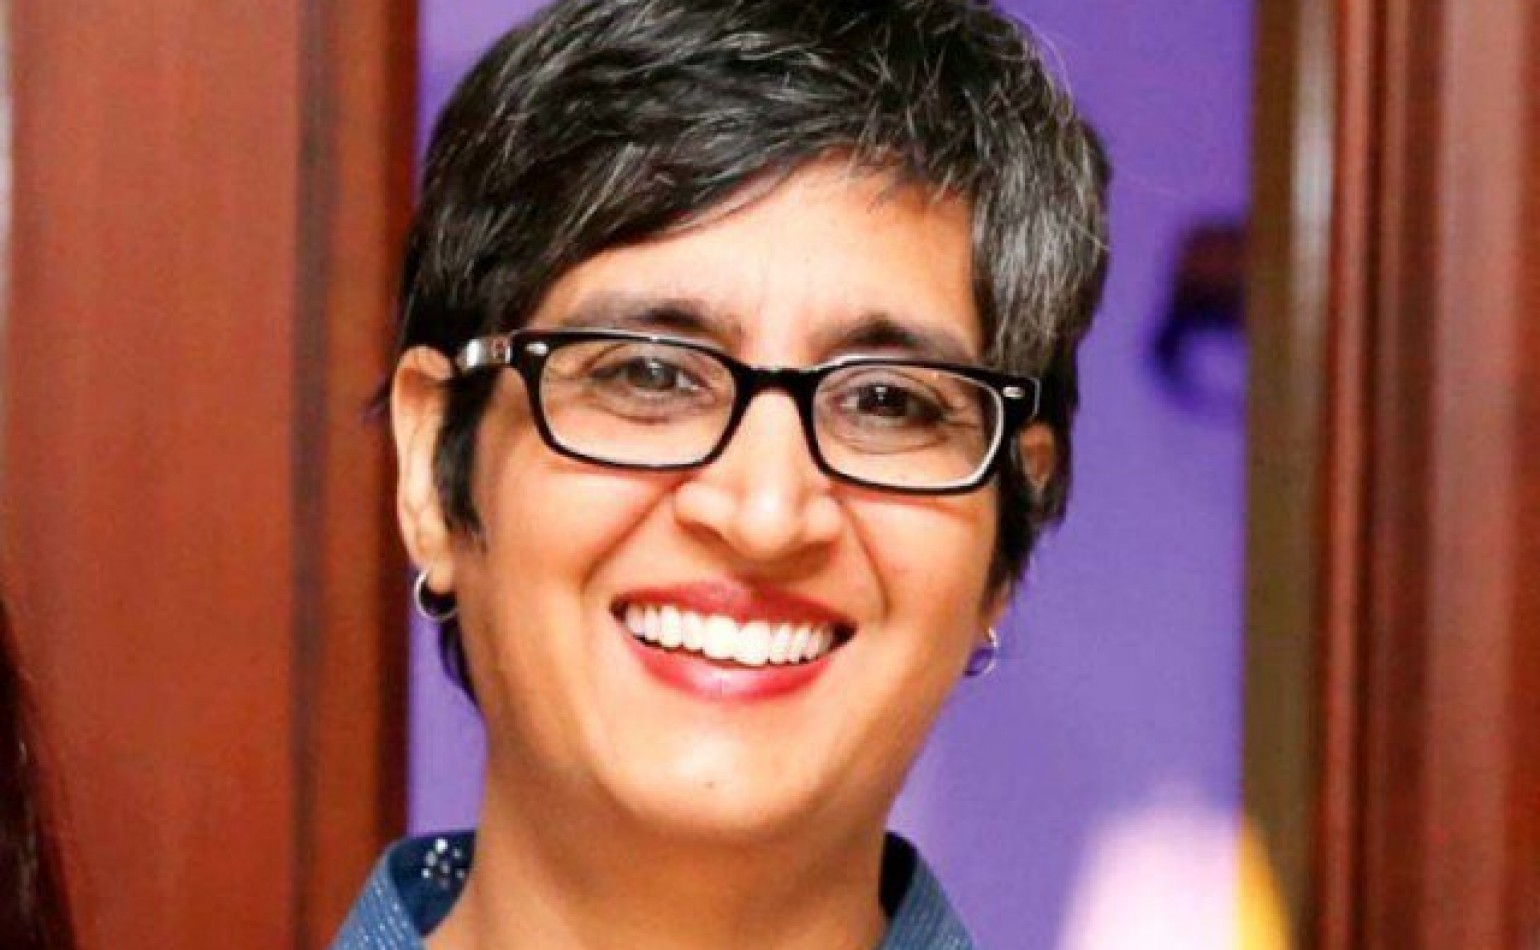 MMfD demands end to impunity; demands government to bring Sabeen Mehmud’s assassins to justice